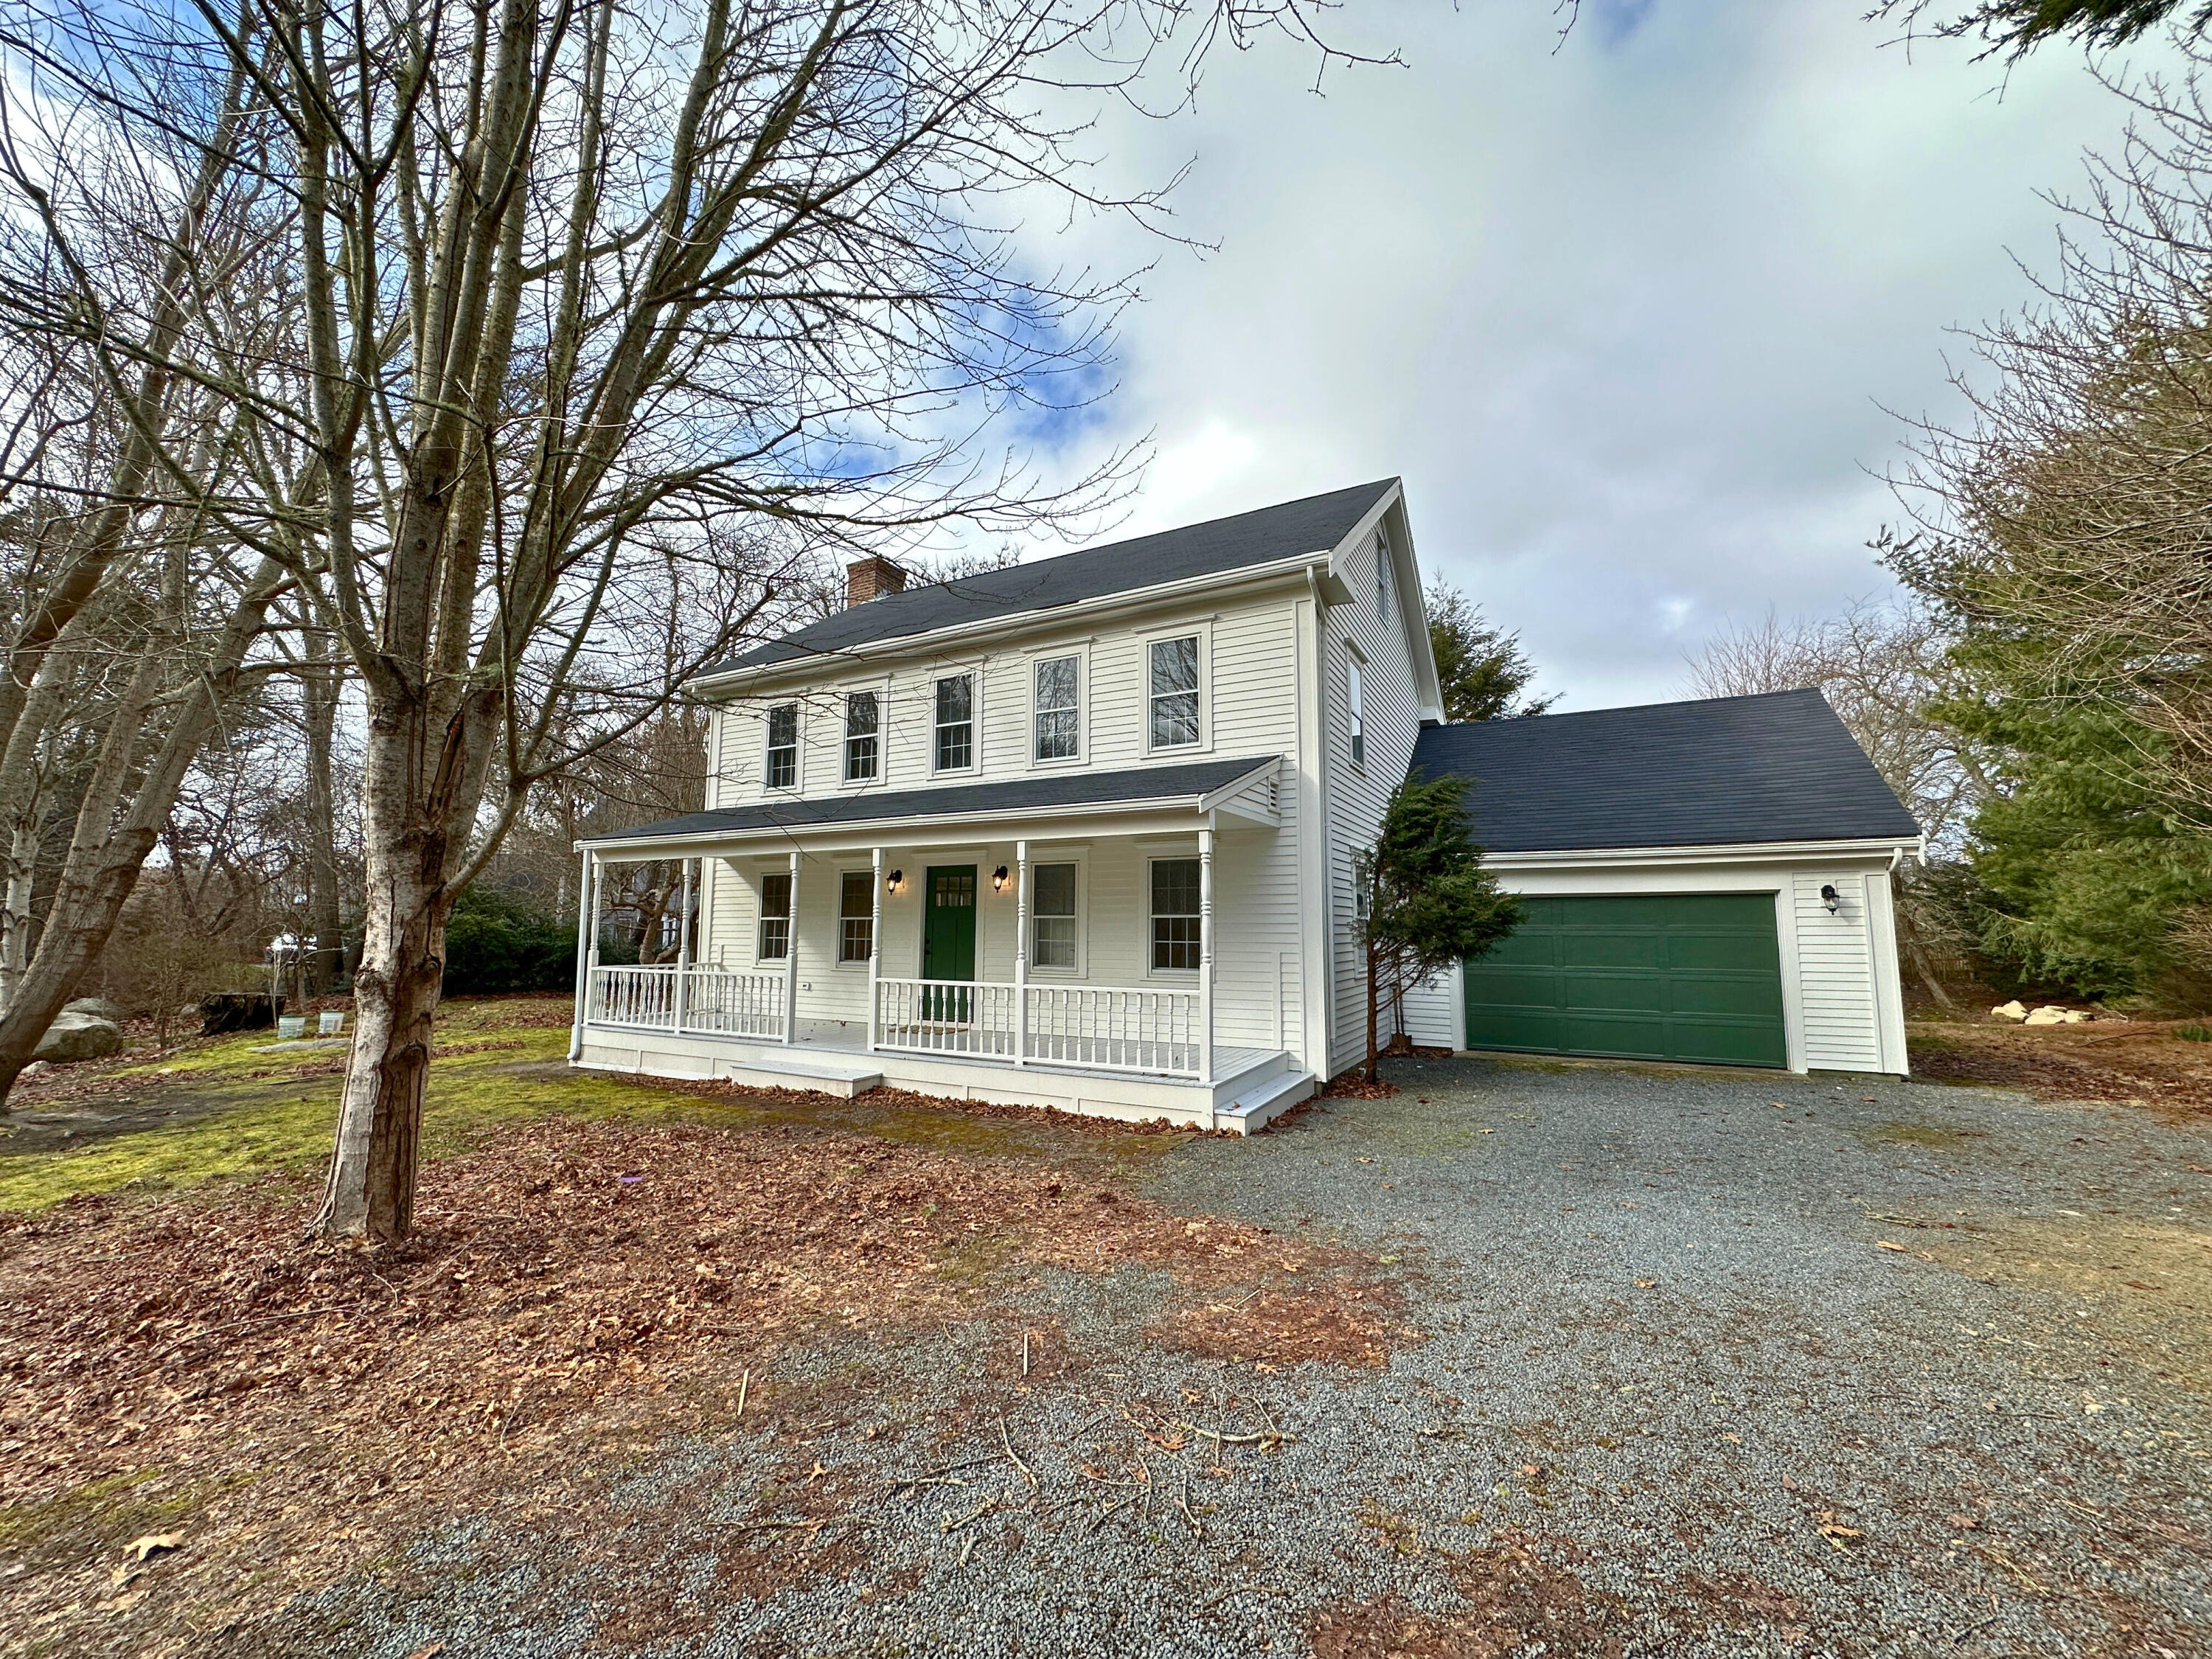 10 A P Newcomb Road, Brewster, Massachusetts 02631, 3 Bedrooms Bedrooms, 7 Rooms Rooms,3 BathroomsBathrooms,Residential,For Sale,10 A P Newcomb Road,22401349